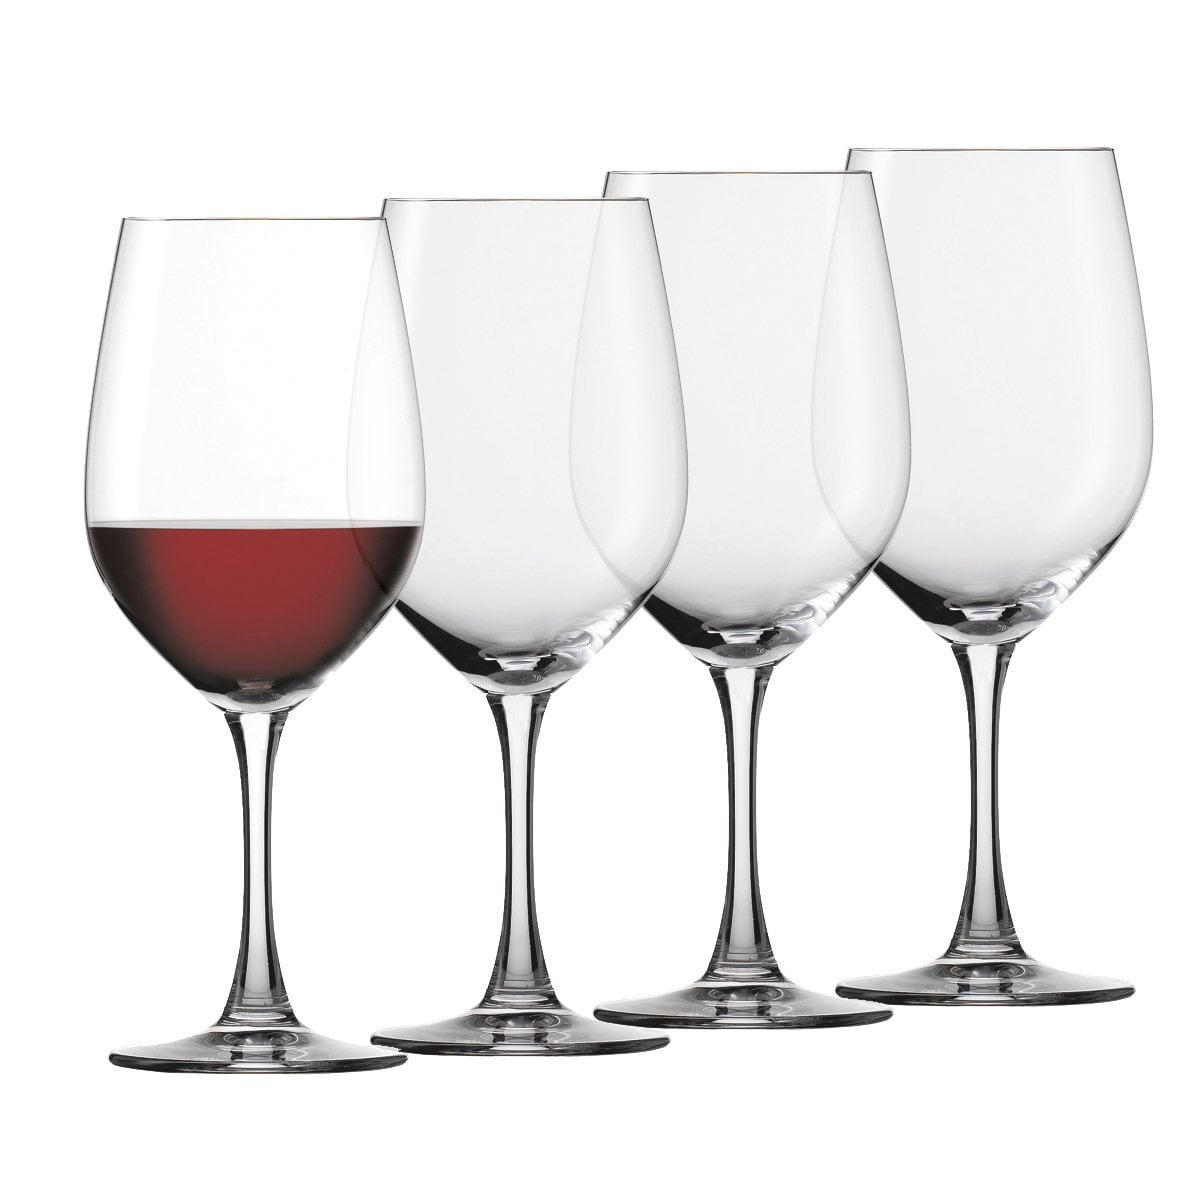 Set of 6 Final Touch ISO Wine Tasting Glasses Lead-Free Crystal